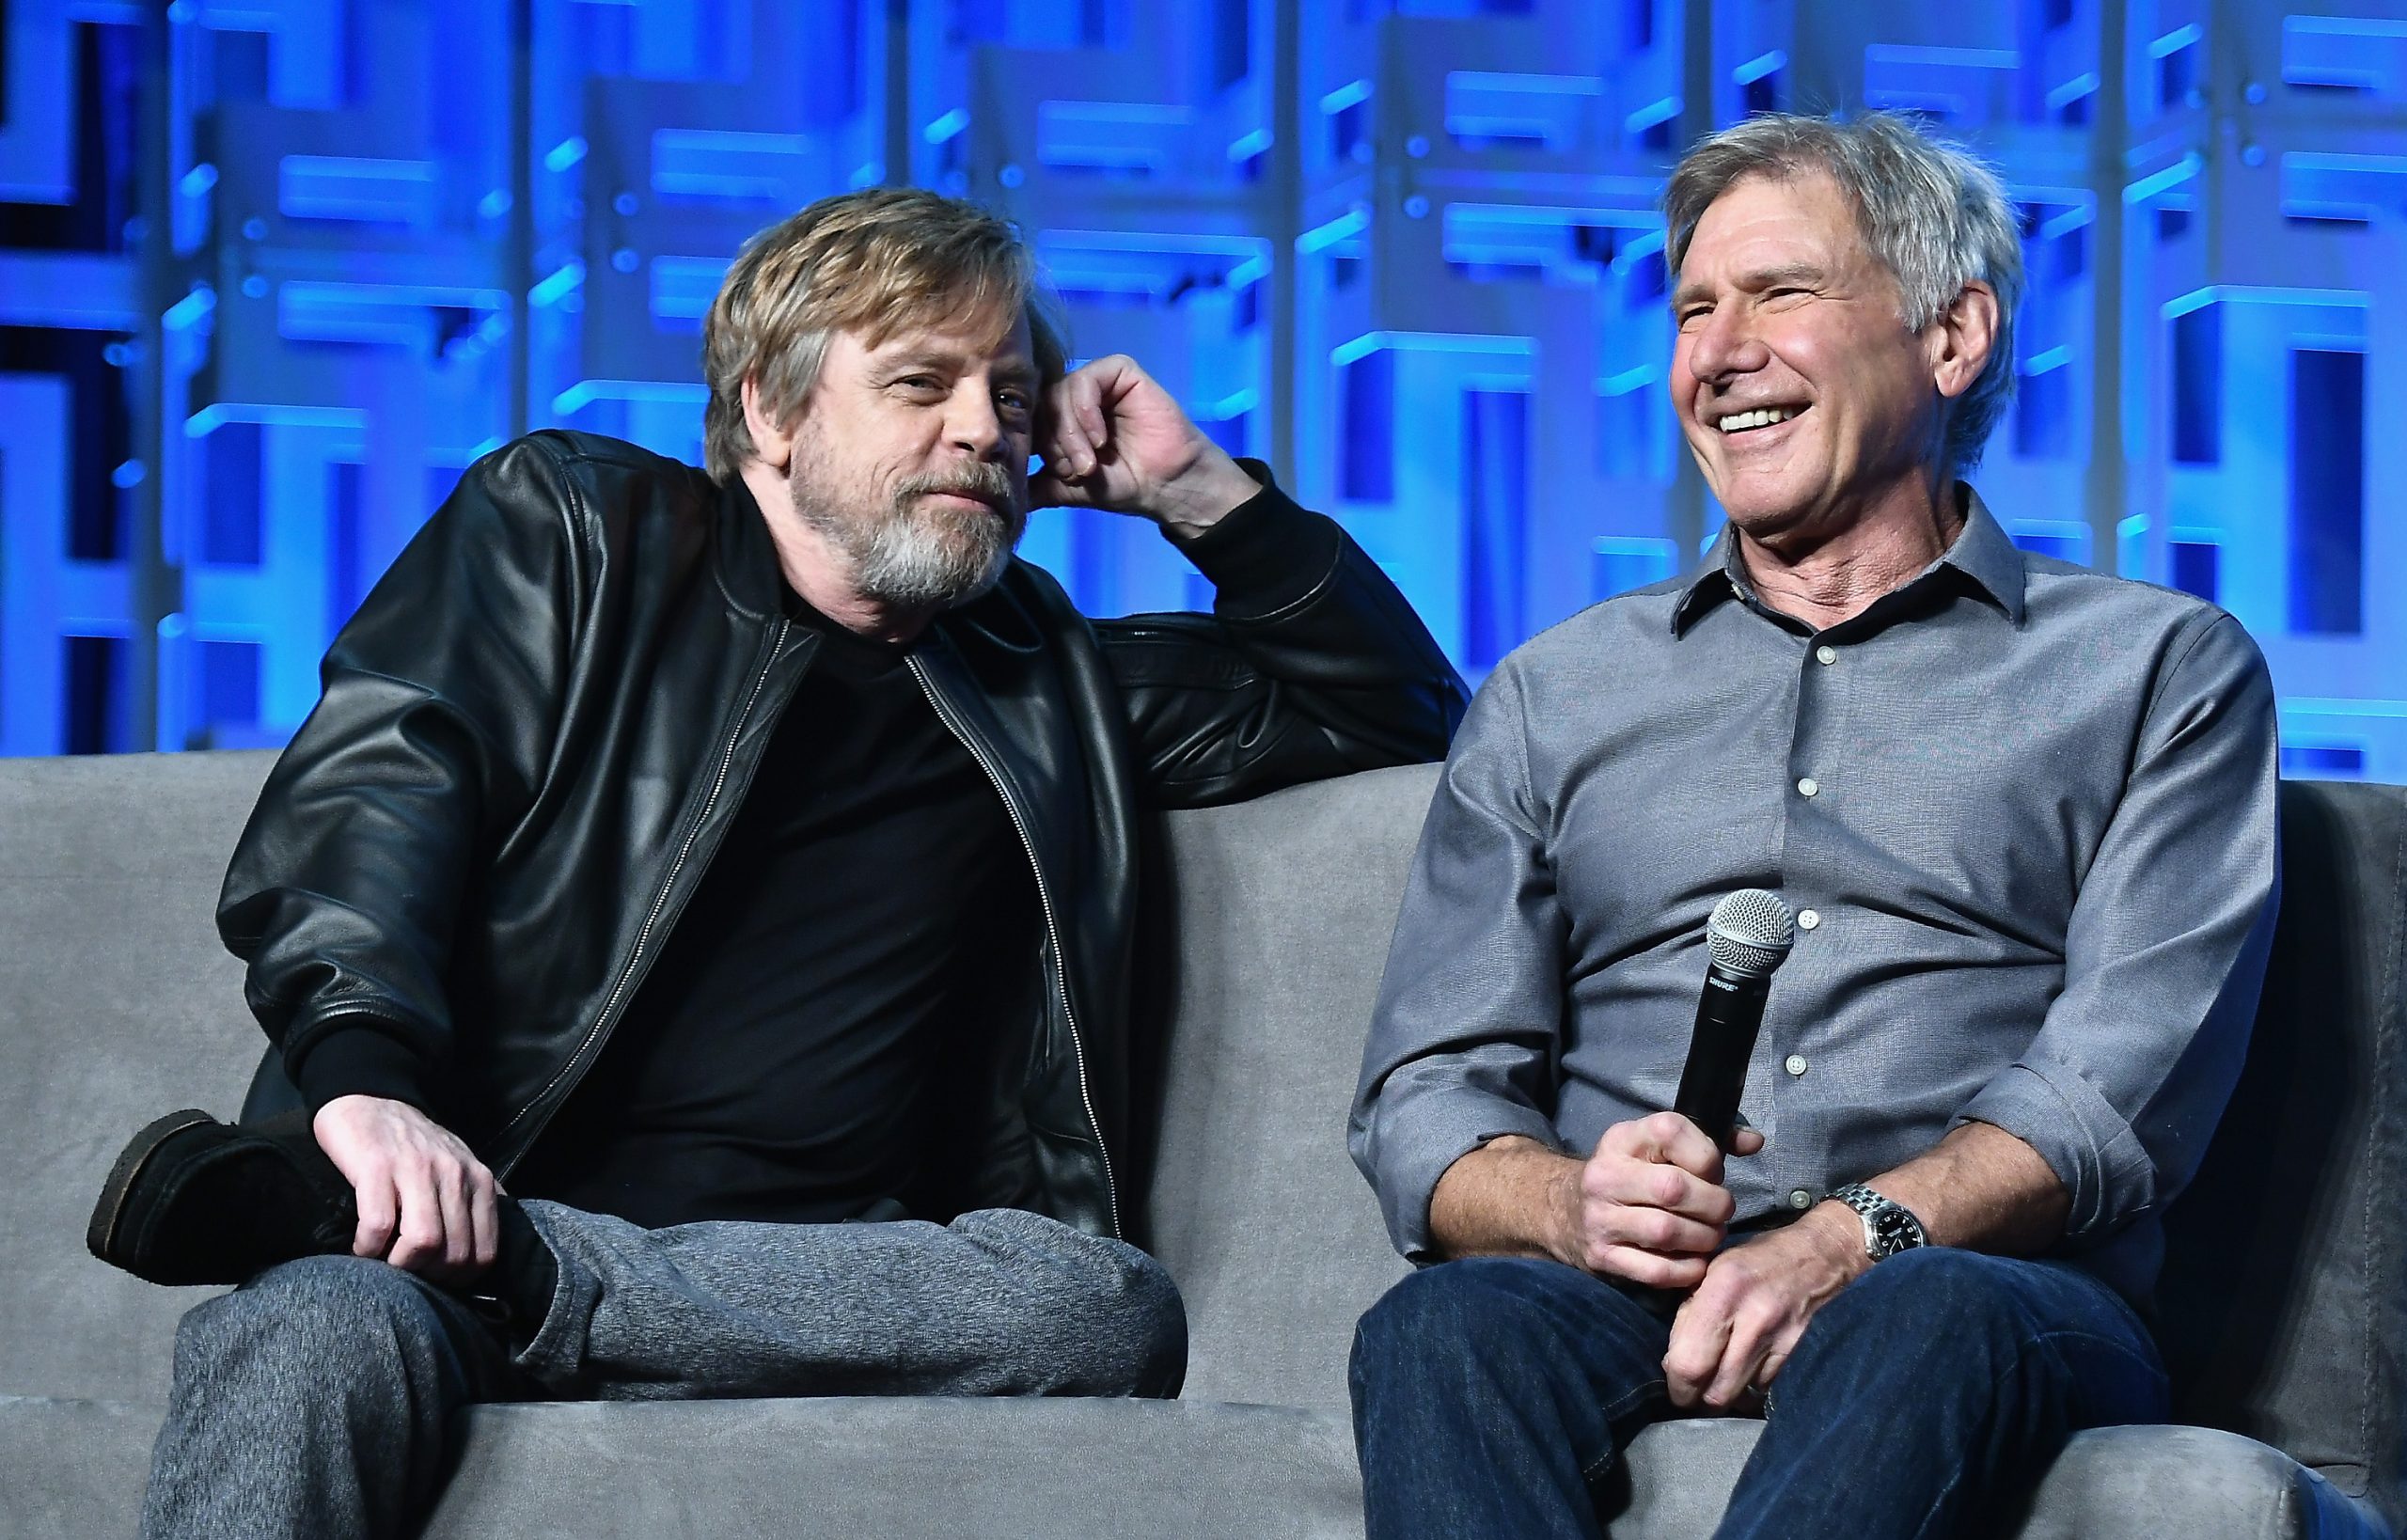 Which ‘Star Wars’ Actor Has The Highest Net Worth?